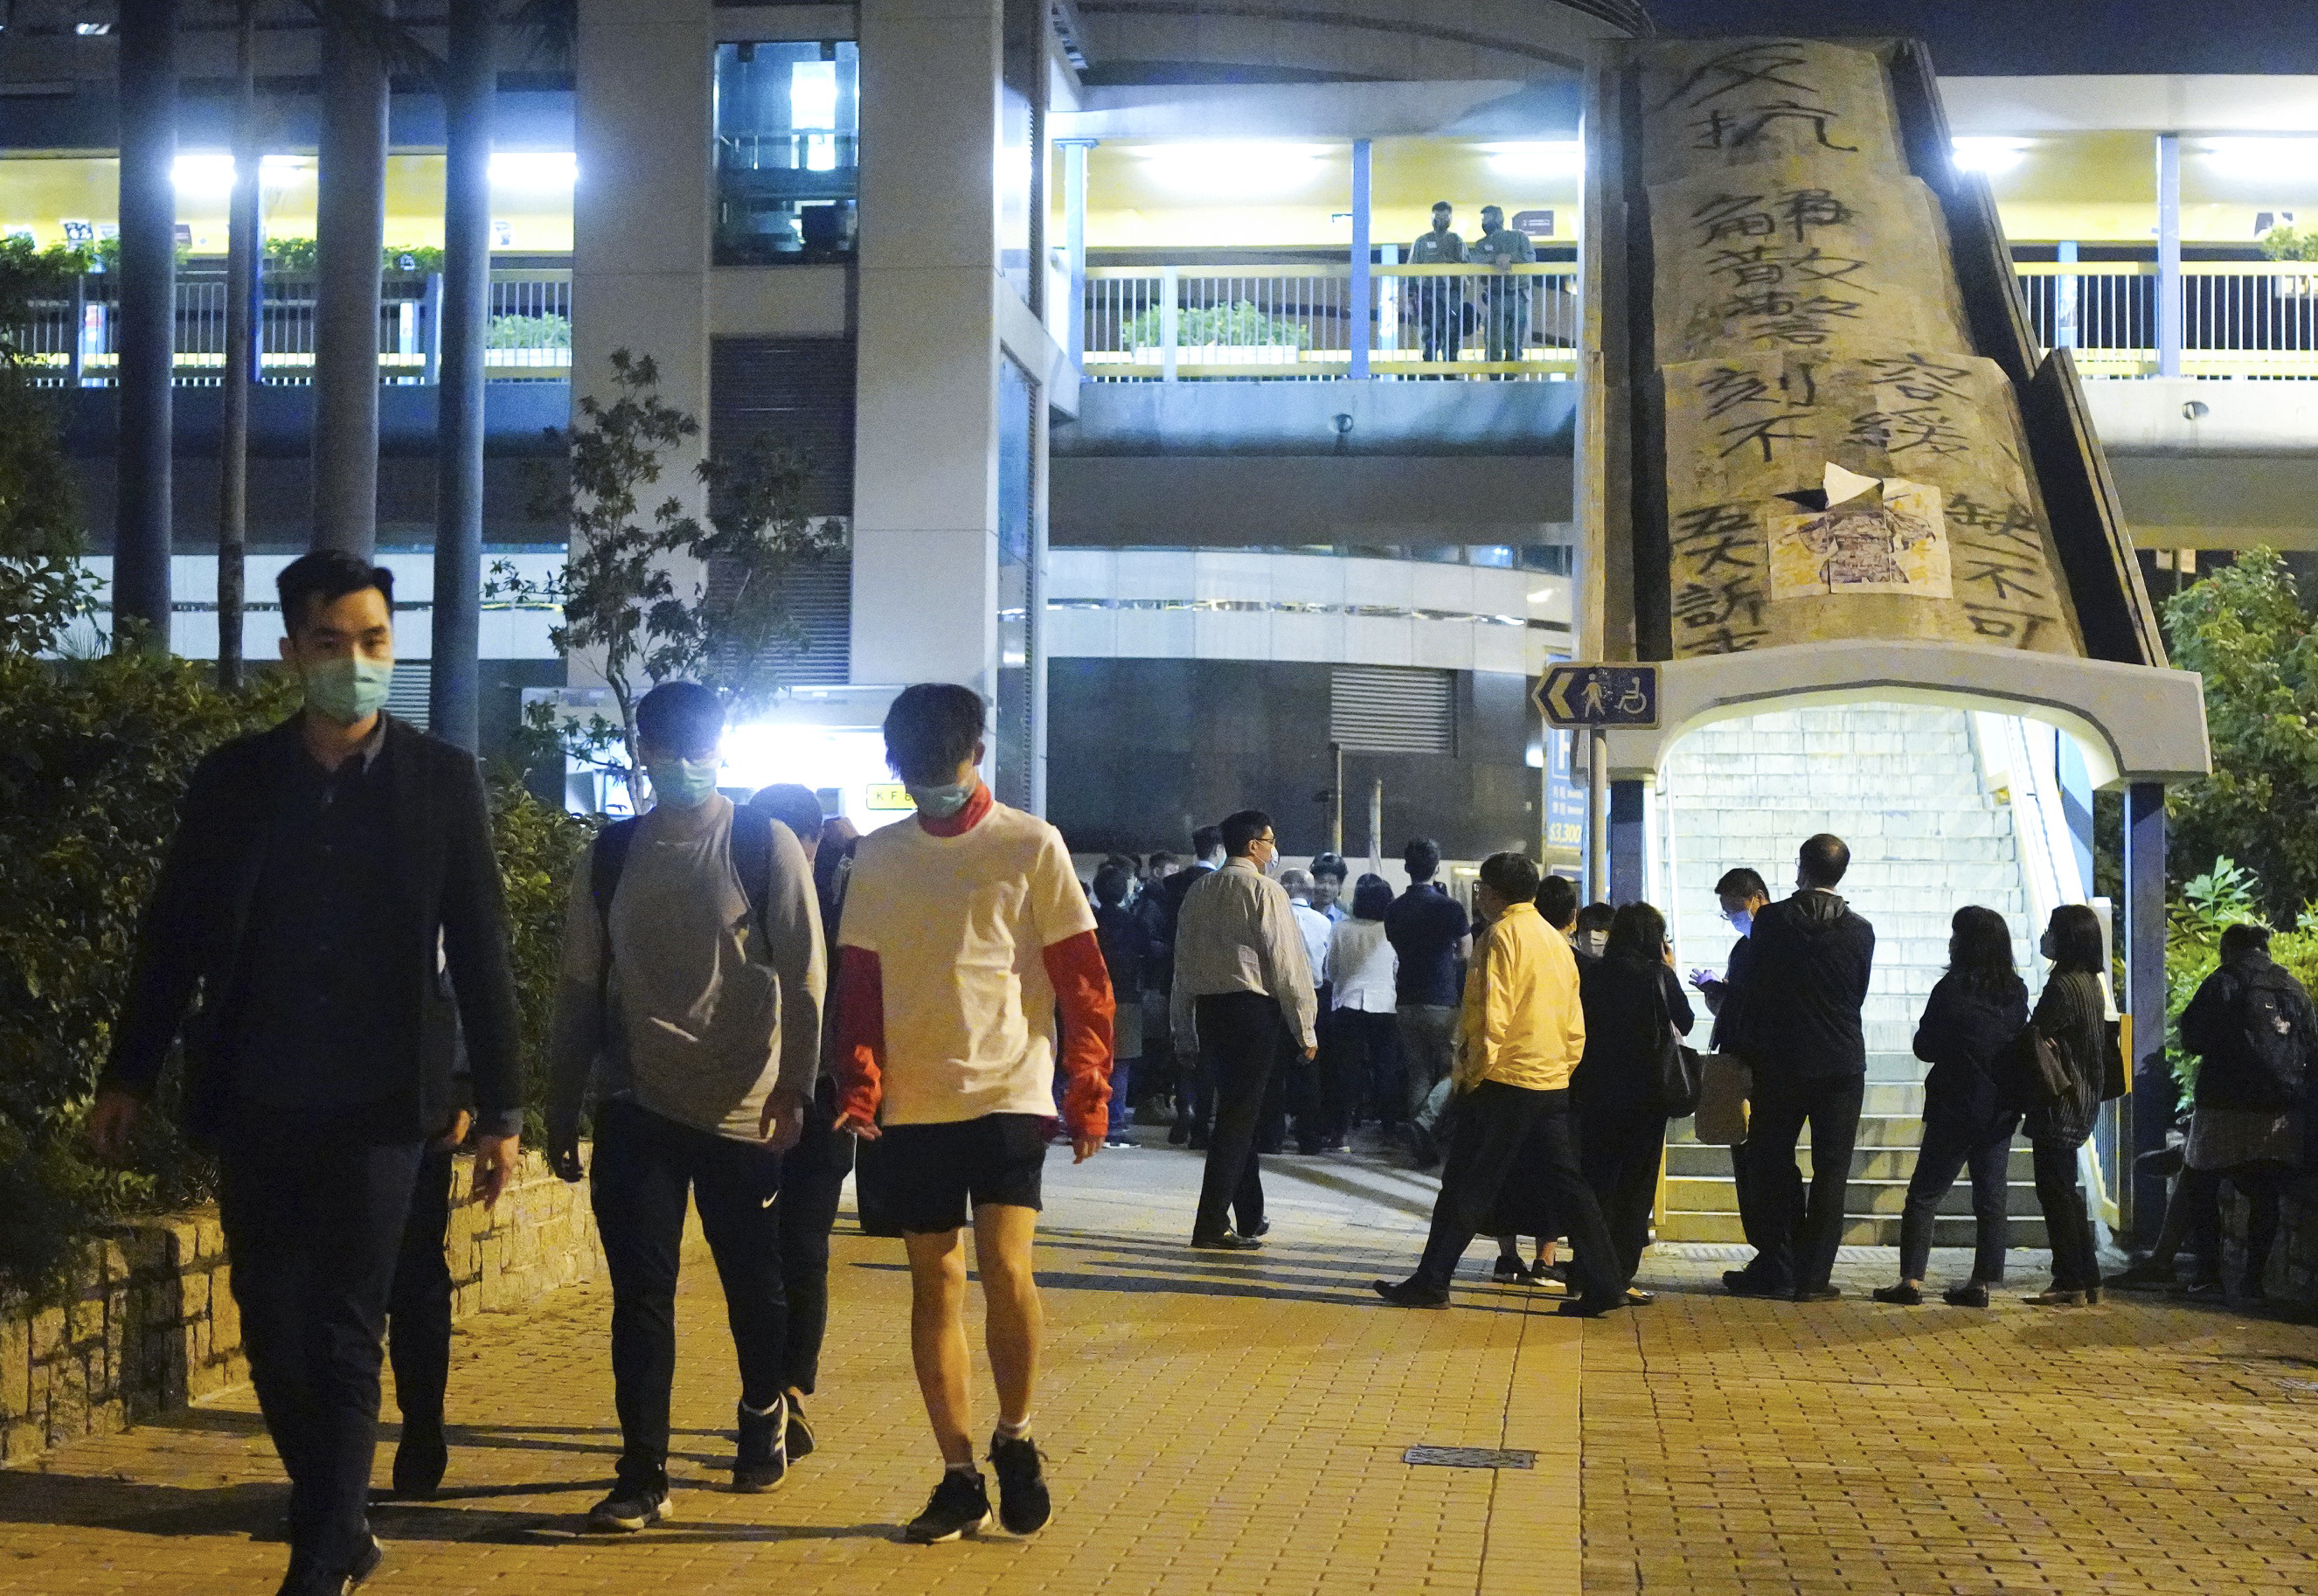 Students under 18 walk after being released from Hong Kong Polytechnic University campus in Hung Hom district, Hong Kong, on November 18, 2019